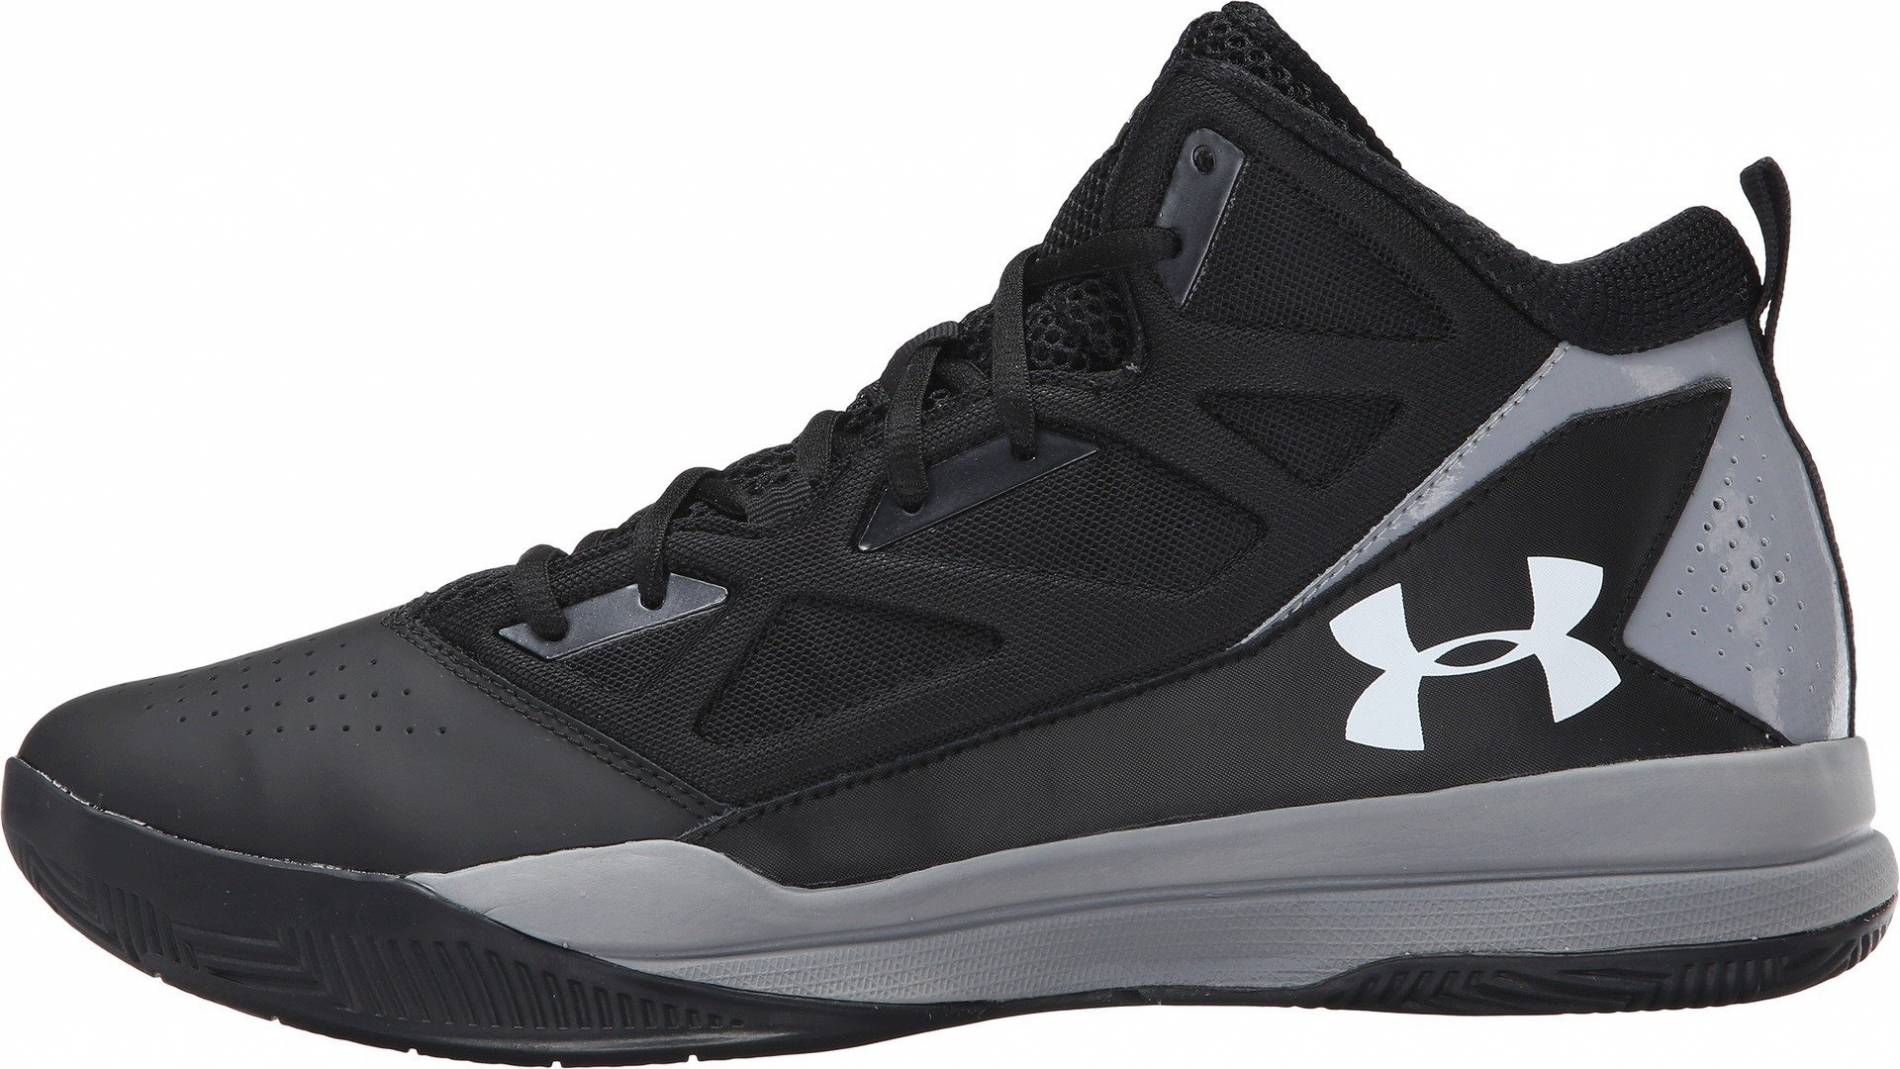 under armour jet low basketball shoes